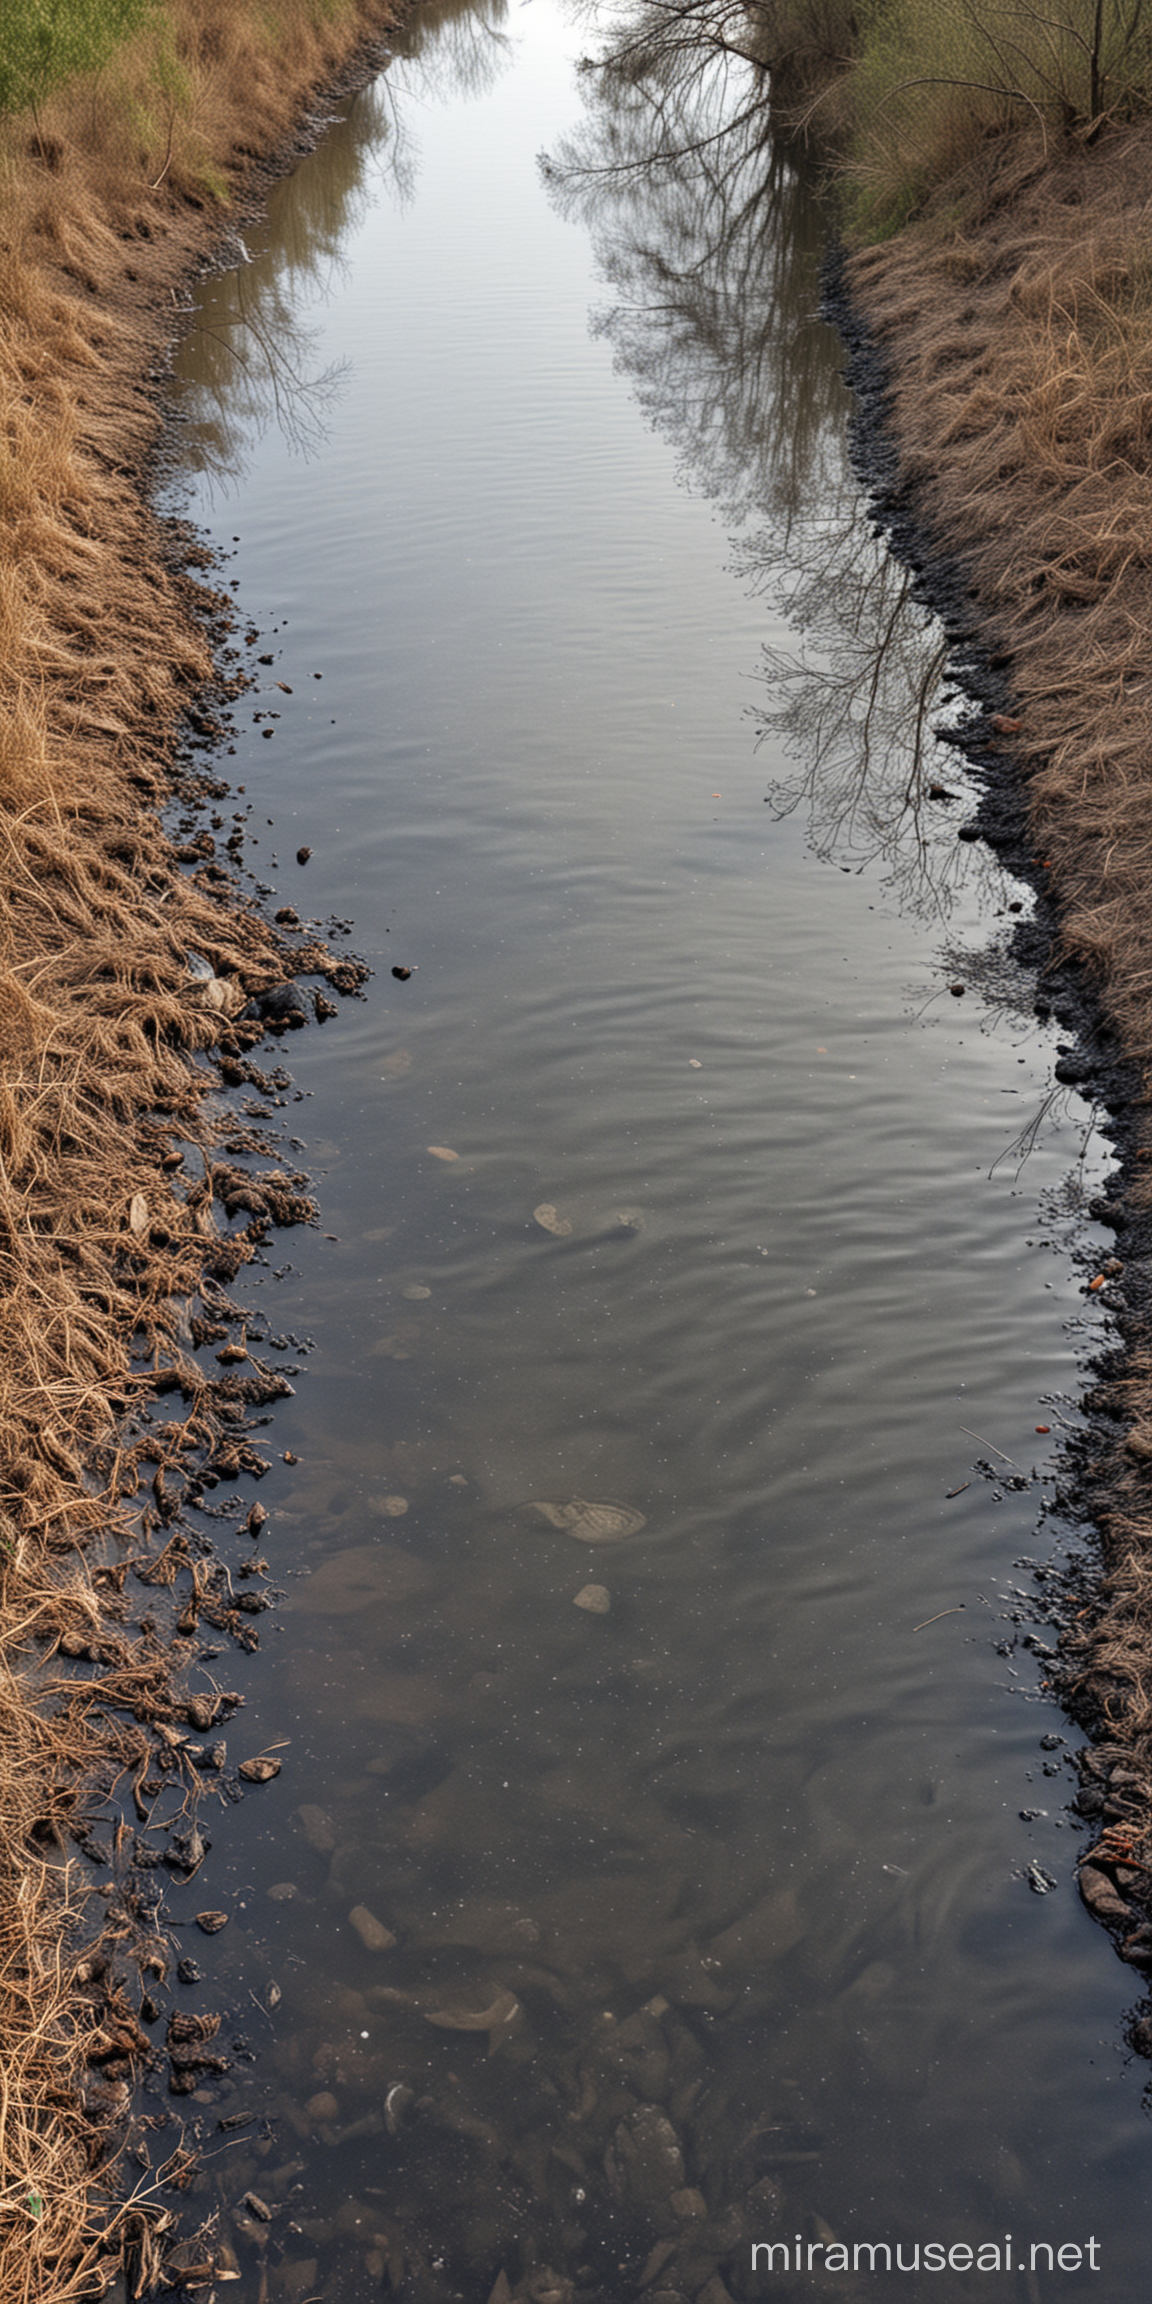 Polluted River Scene Contaminated by Dirty Oil Spill